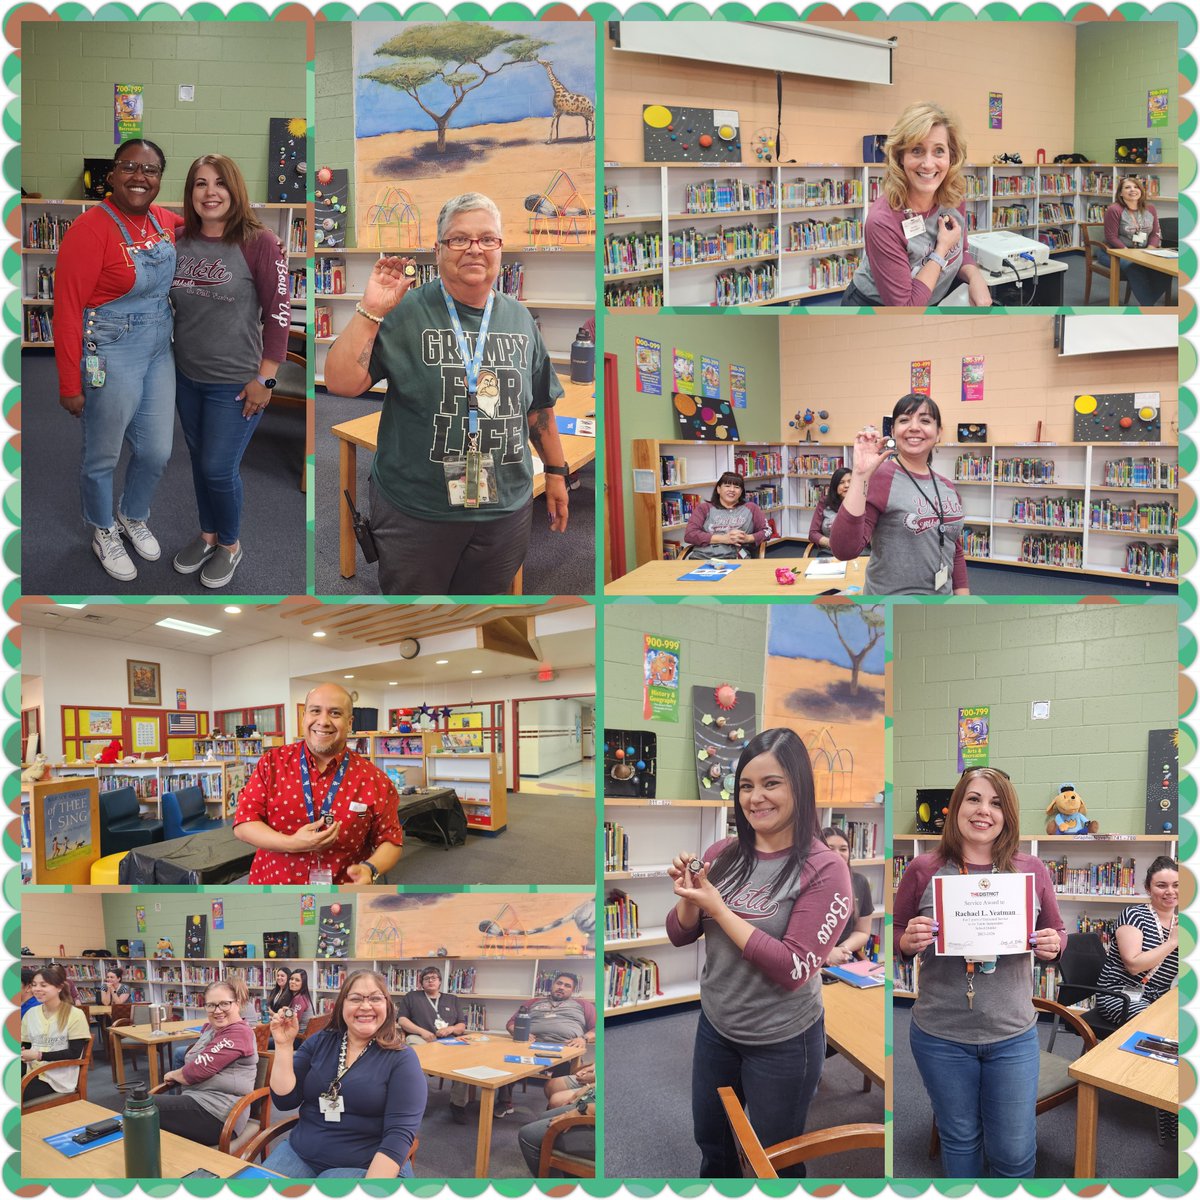 @Presa_Wildcats @presa_library @Banegas19Wendy @AlexCamack 
Today we celebrated Years of Service from 5 to 30 plus years. We also celebrated 🥳 a newly certified Teacher 👩‍🏫 and a Masters Degree in Special Education.  #BowUp
#WeArePresa 
#WeDeliverExcellence
#THEDISTRICT